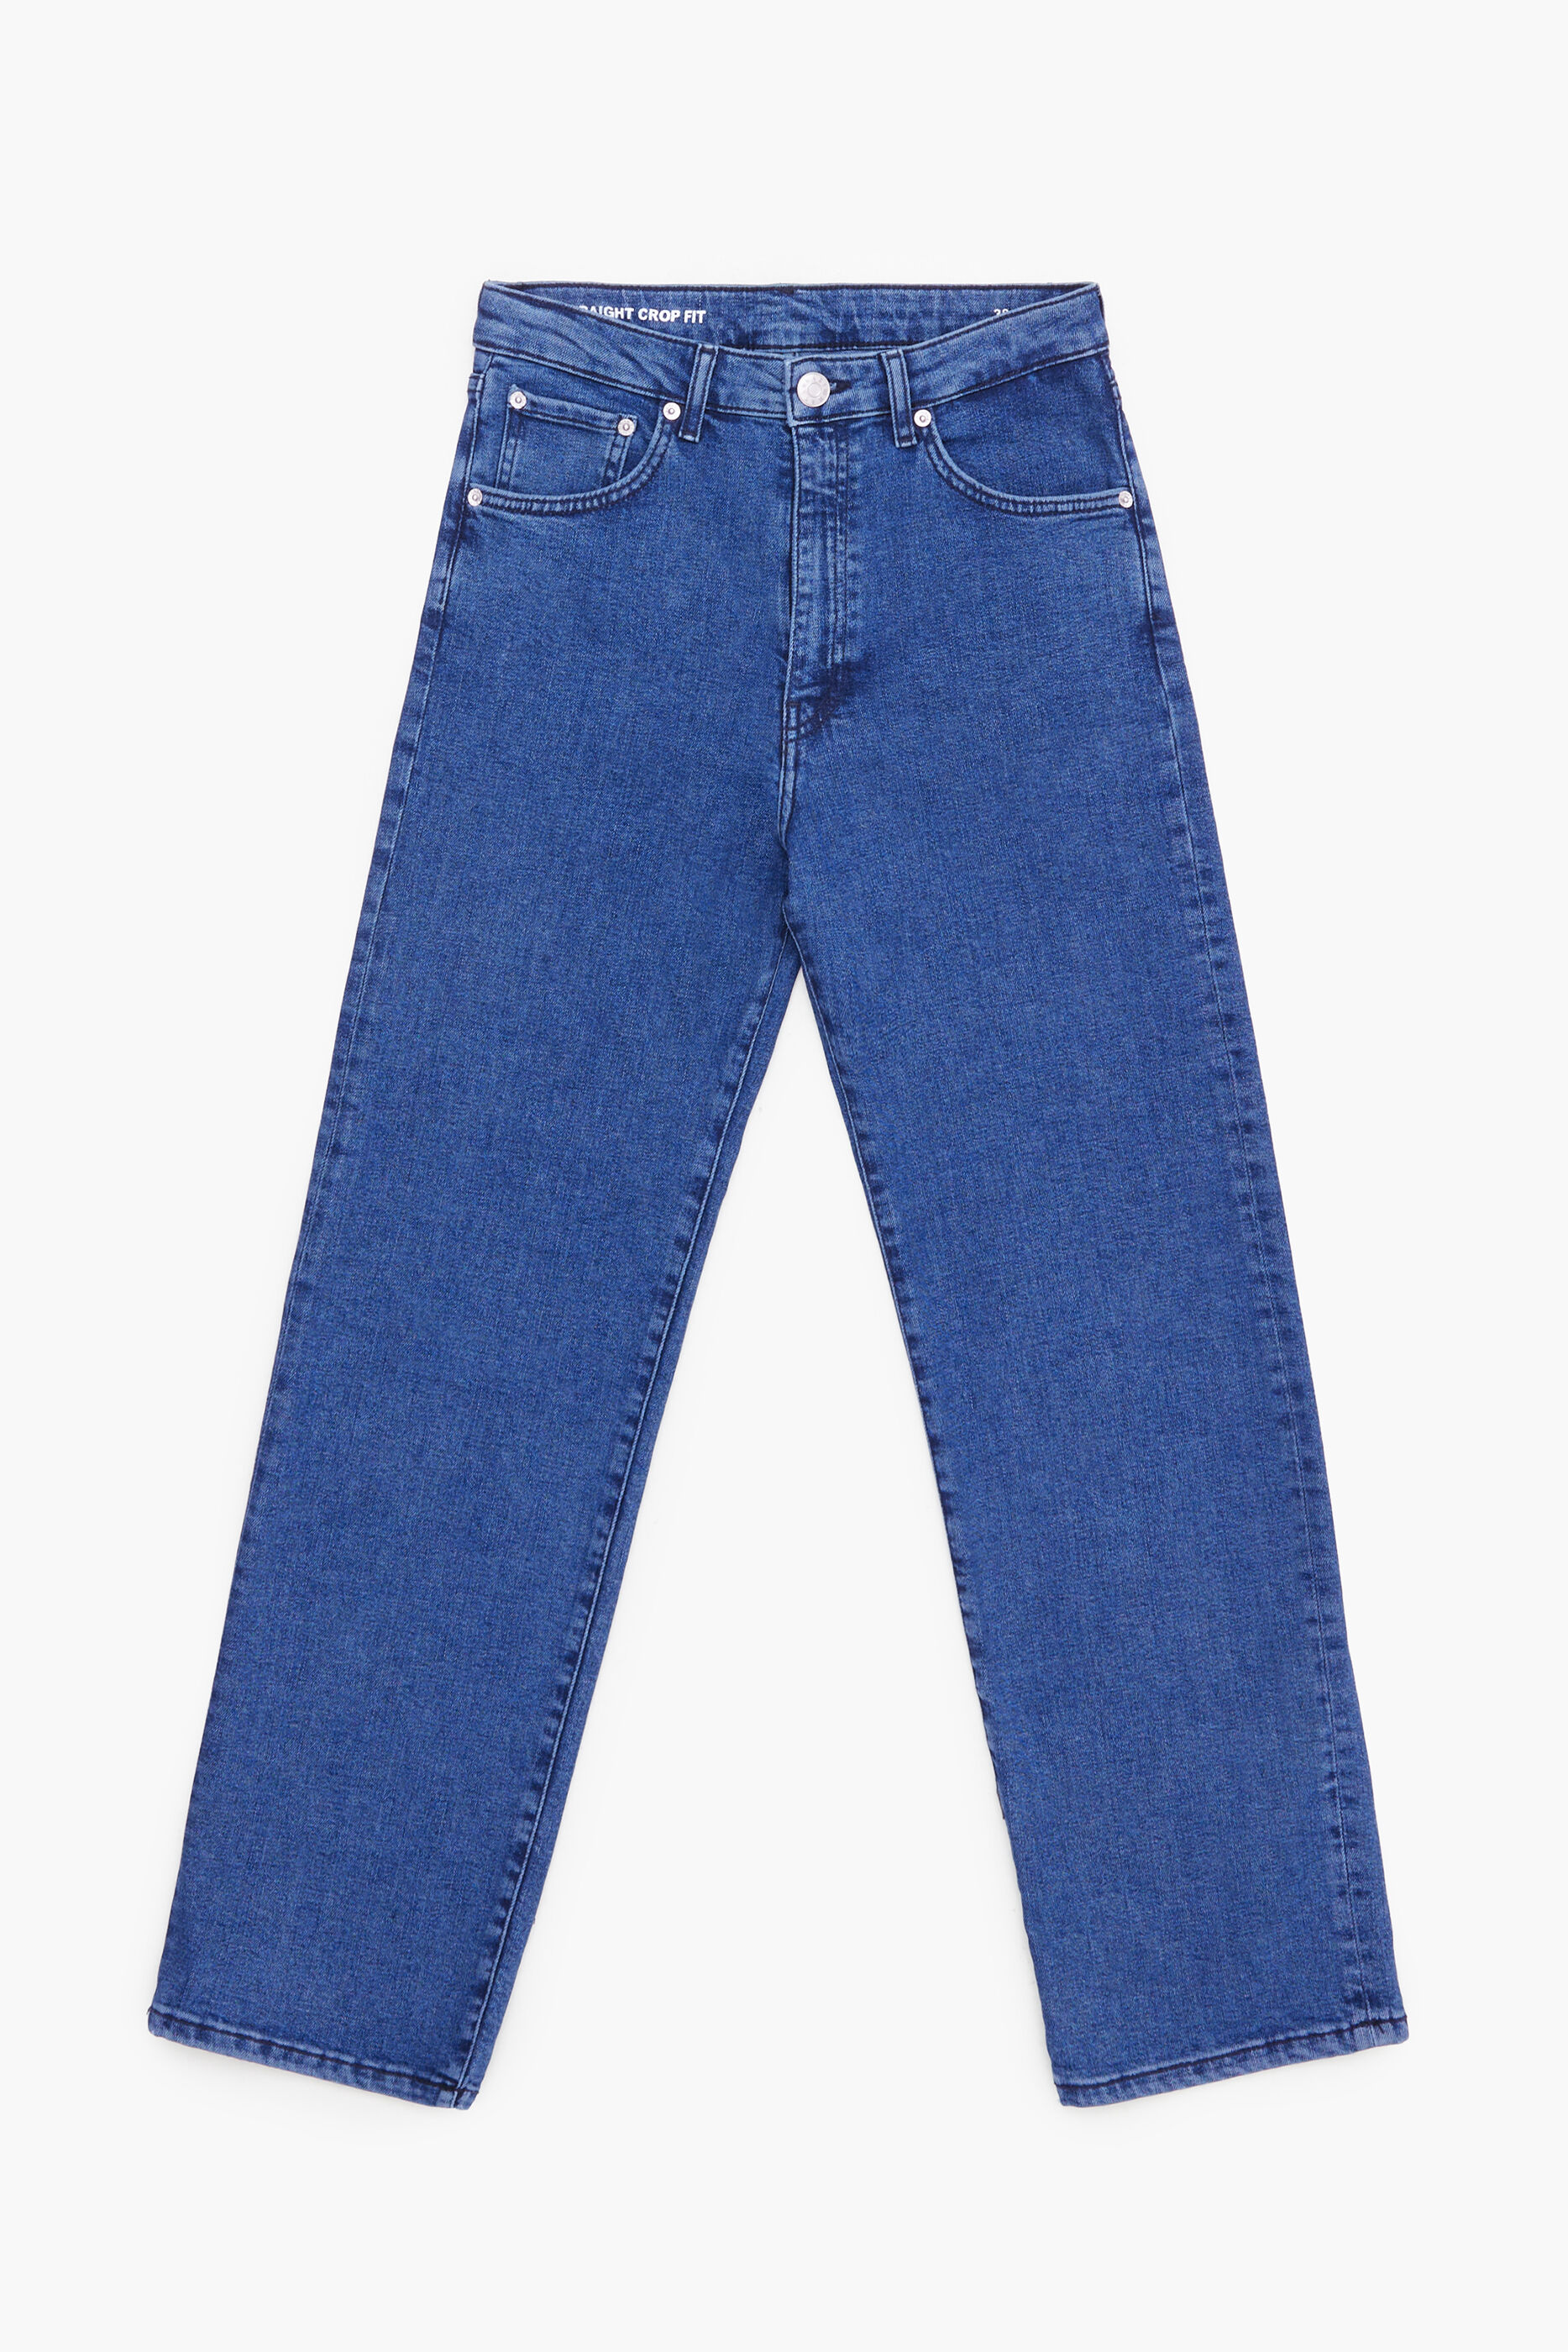 STRAIGHT CROPPED - Dark blue straight jeans